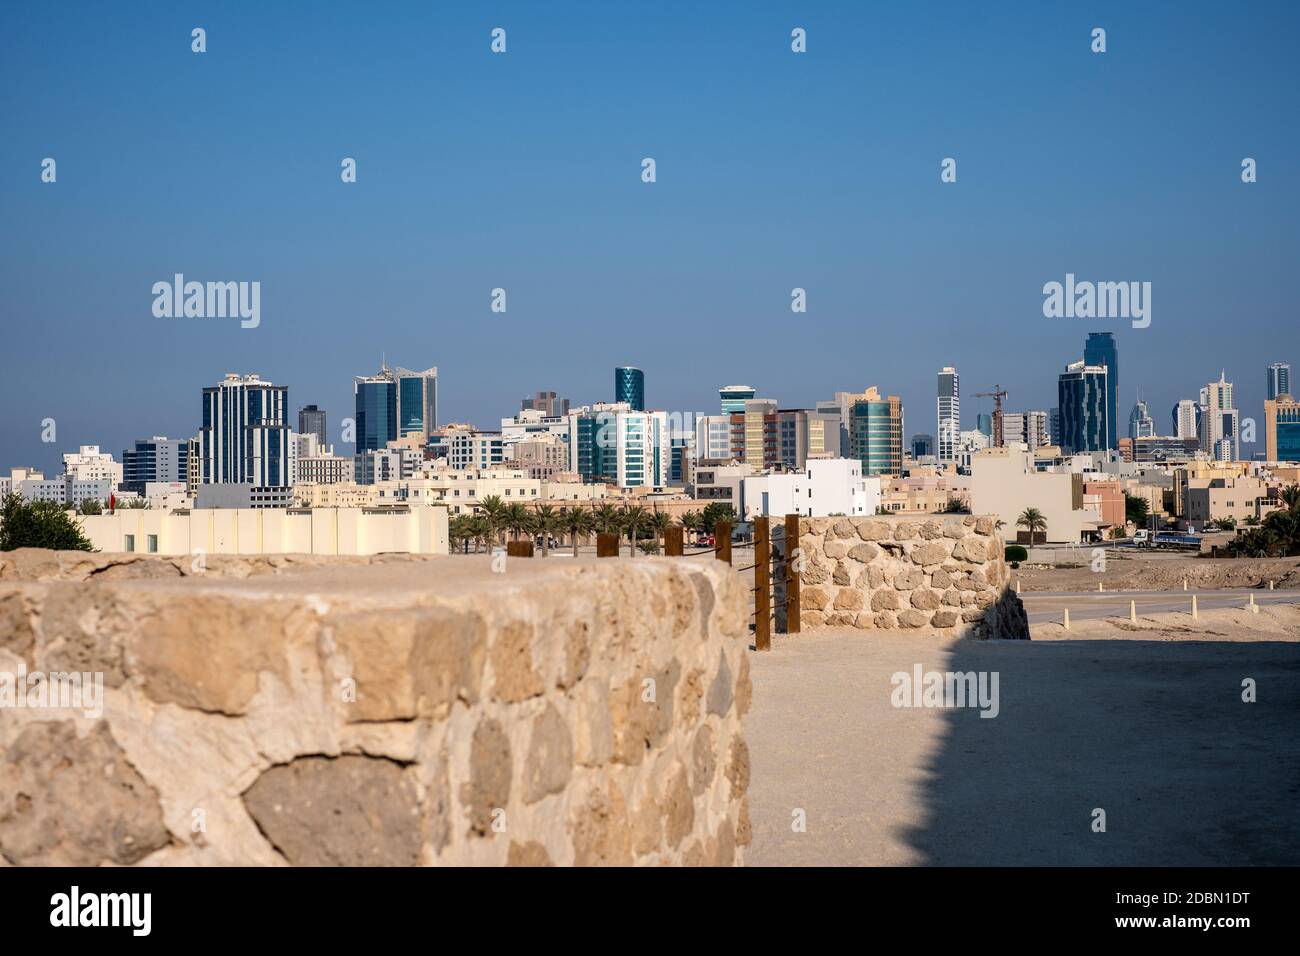 The modern city of Manama, Bahrain viewed from the ruins of the Bahrain fort Stock Photo